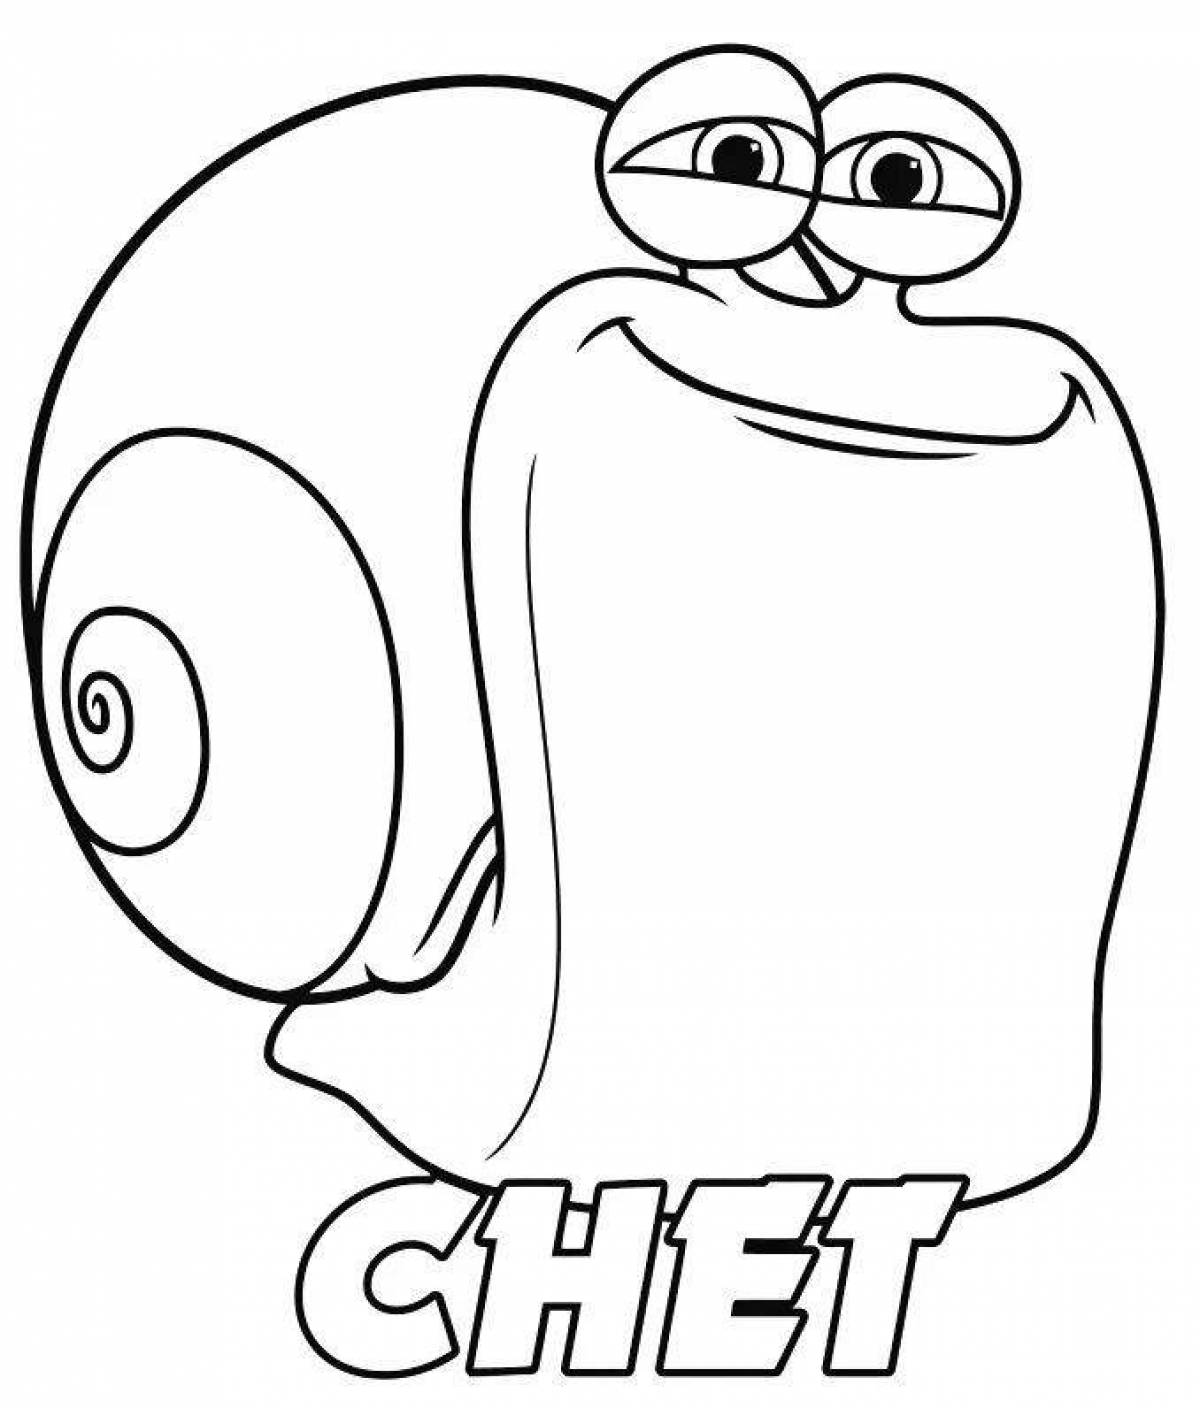 Coloring page nice turbo snail